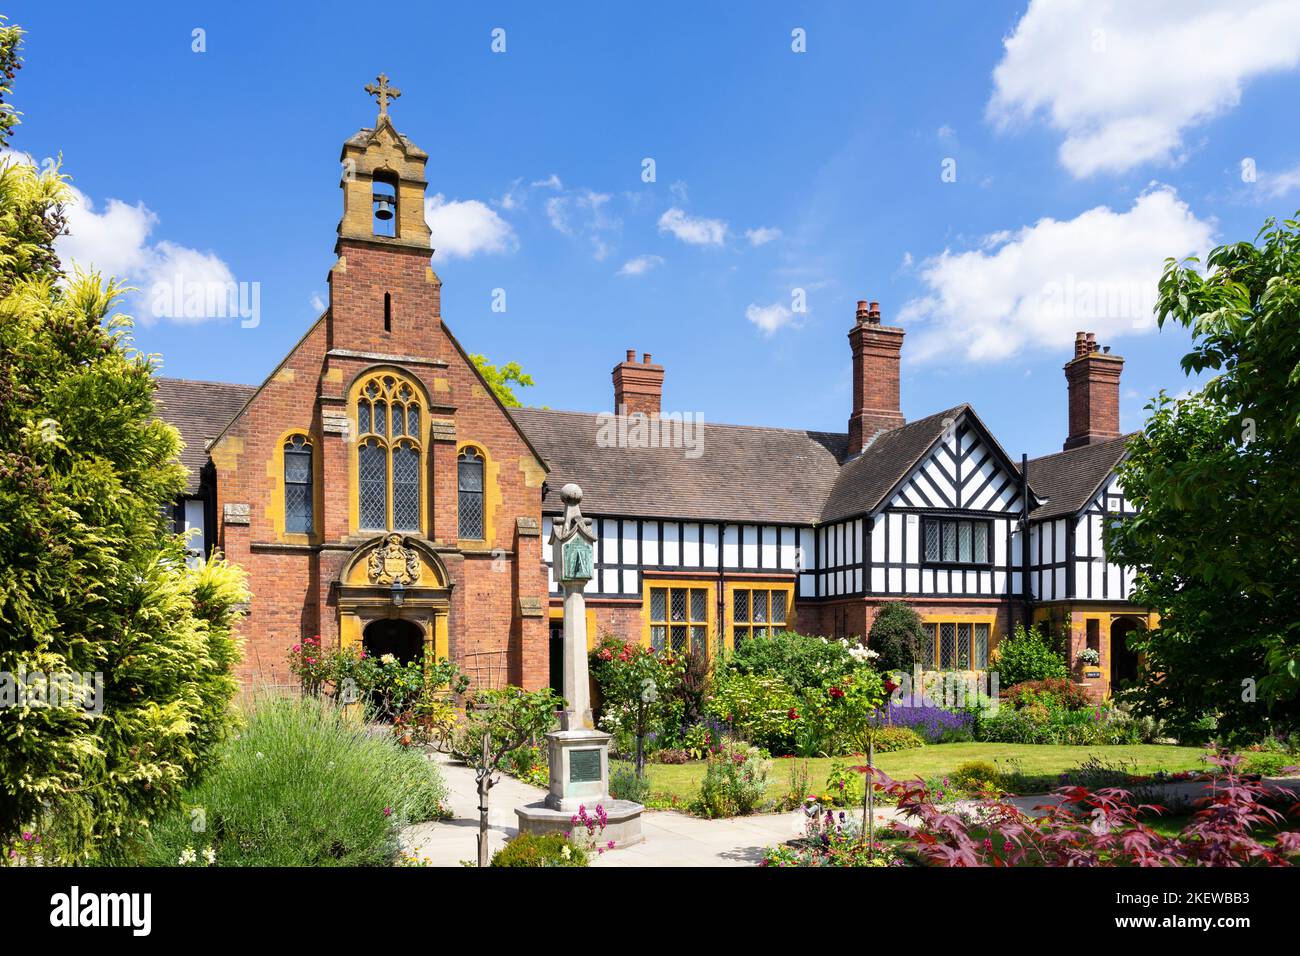 Almshouses UK Worcester Lasletts Almshouses Worcester fait partie de Laslett's Almshouse Charity Union Street Worcester Worcestershire Angleterre GB Europe Banque D'Images